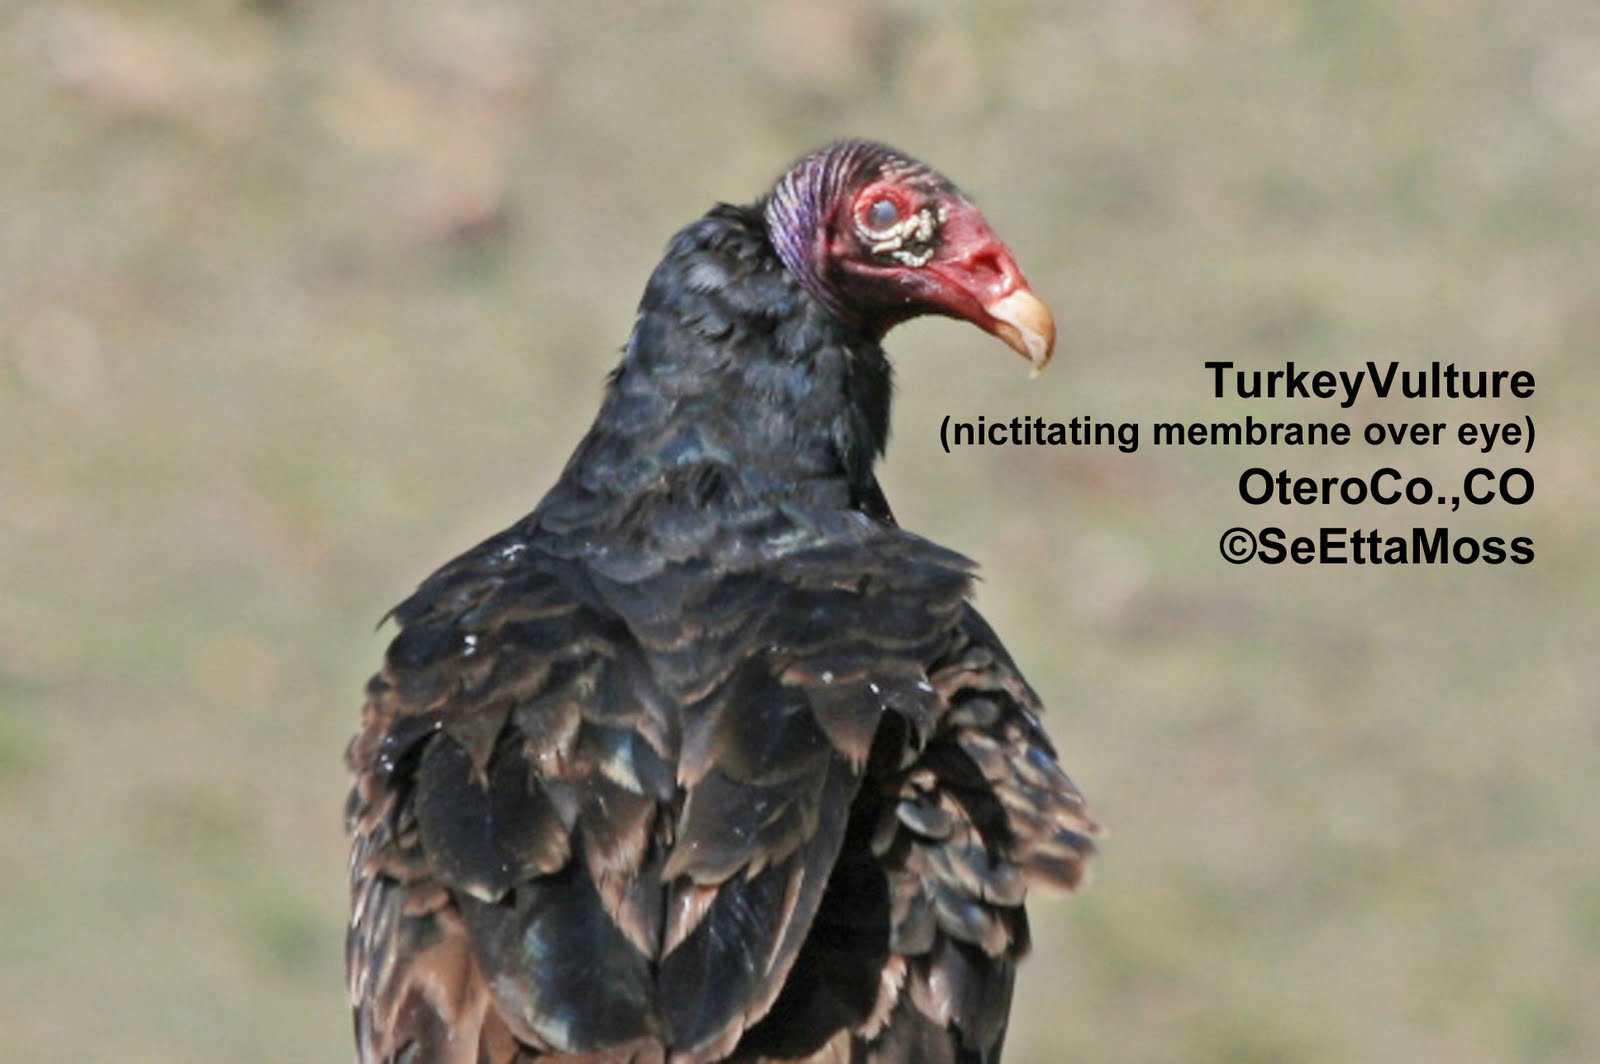 Birds and Nature: Turkey Vulture-too close for visual comfort